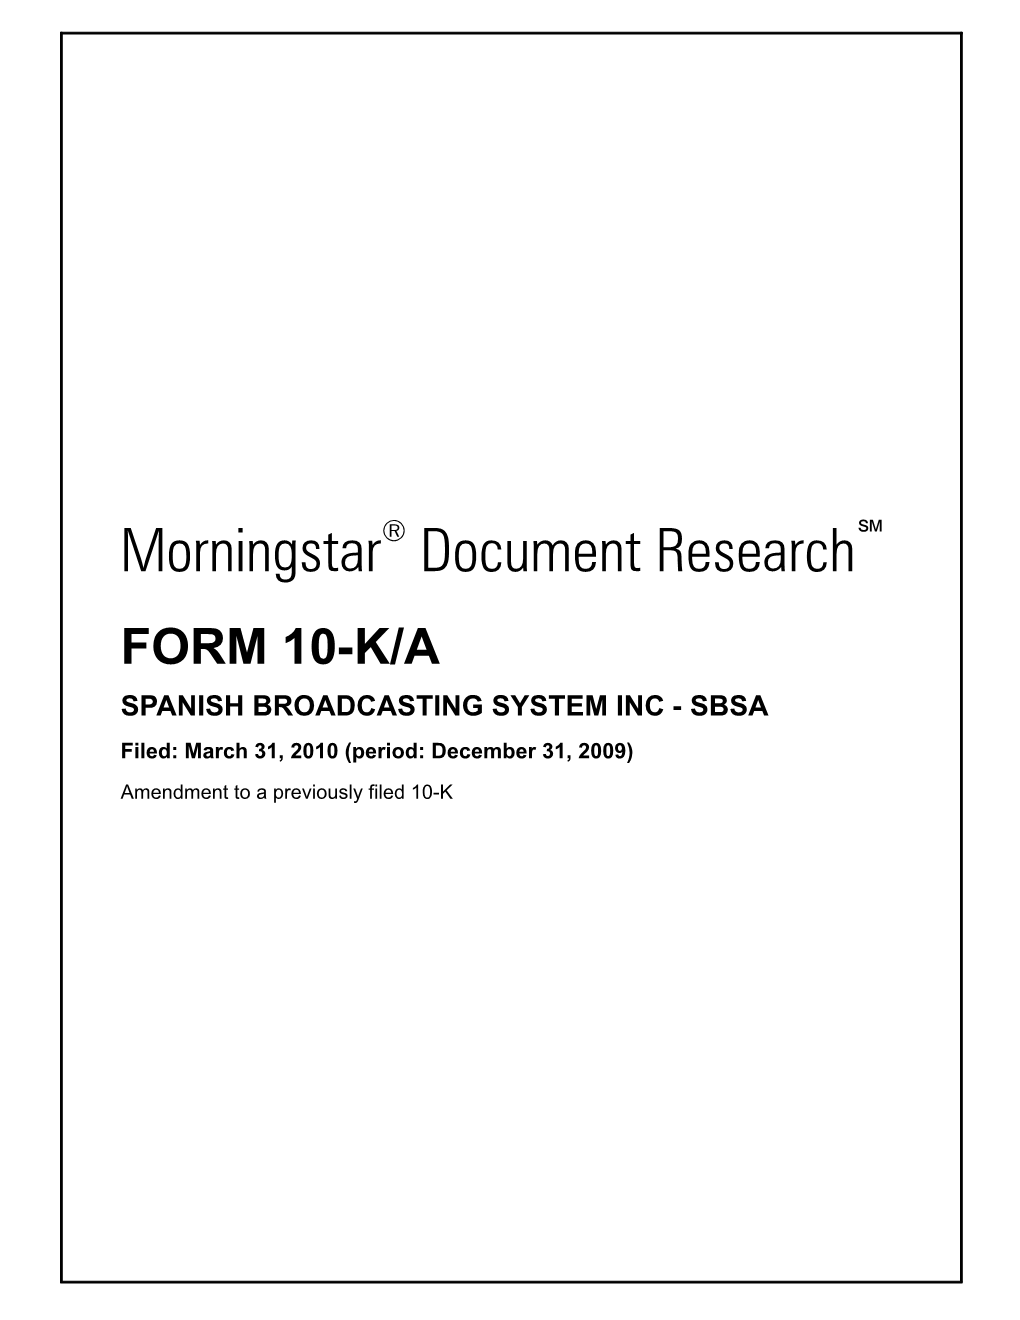 Morningstar Document Research FORM 10-K/A